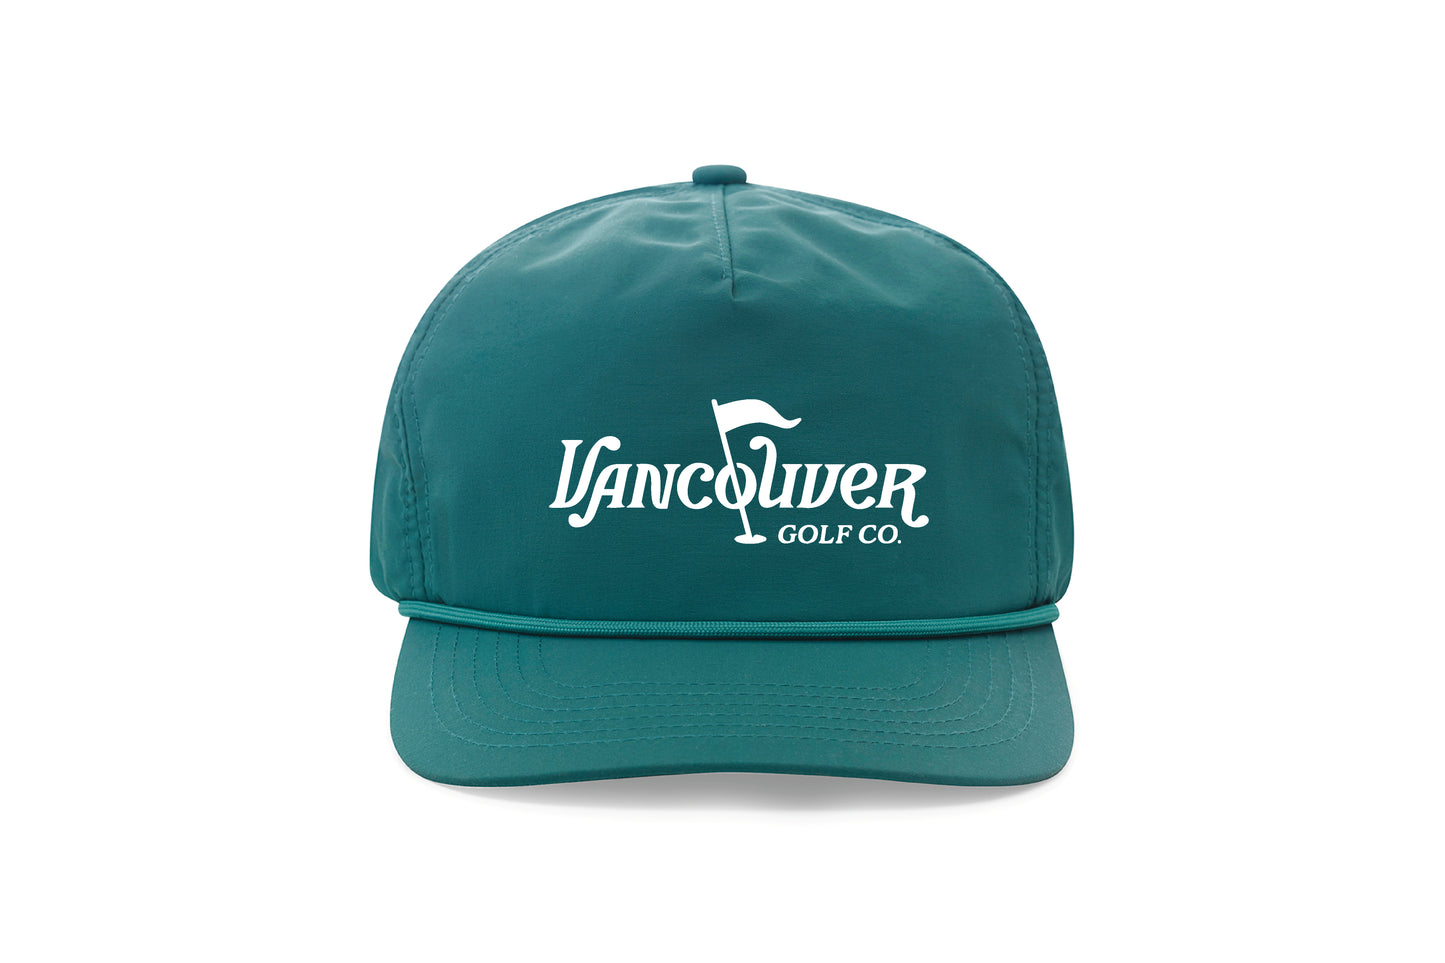 Vancouver Teal